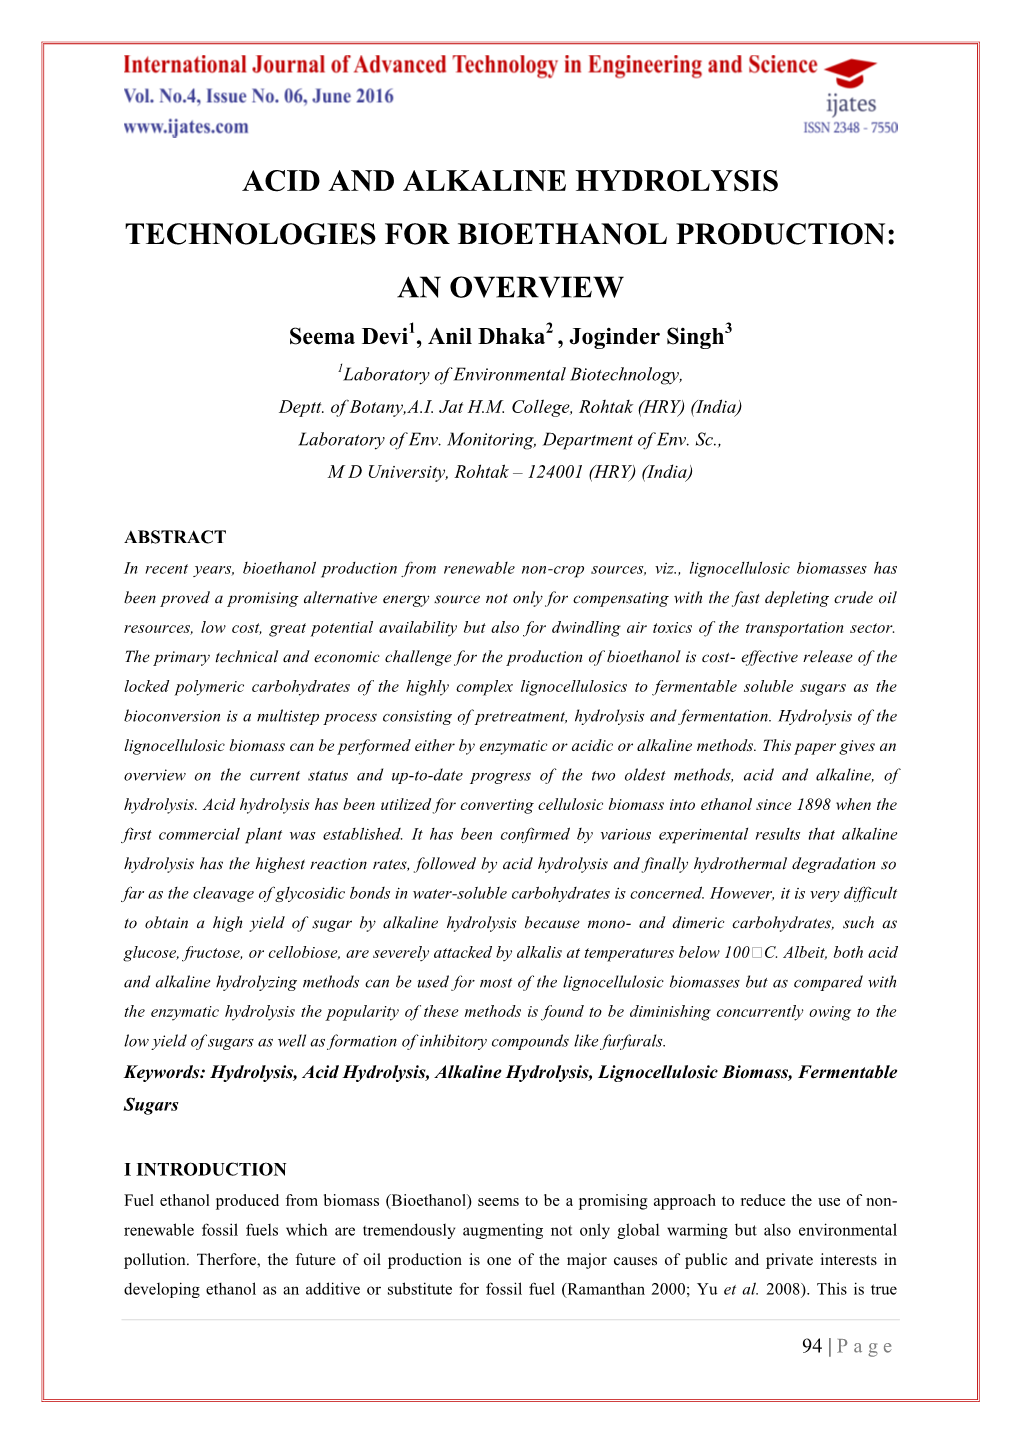 Acid and Alkaline Hydrolysis Technologies for Bioethanol Production: an Overview